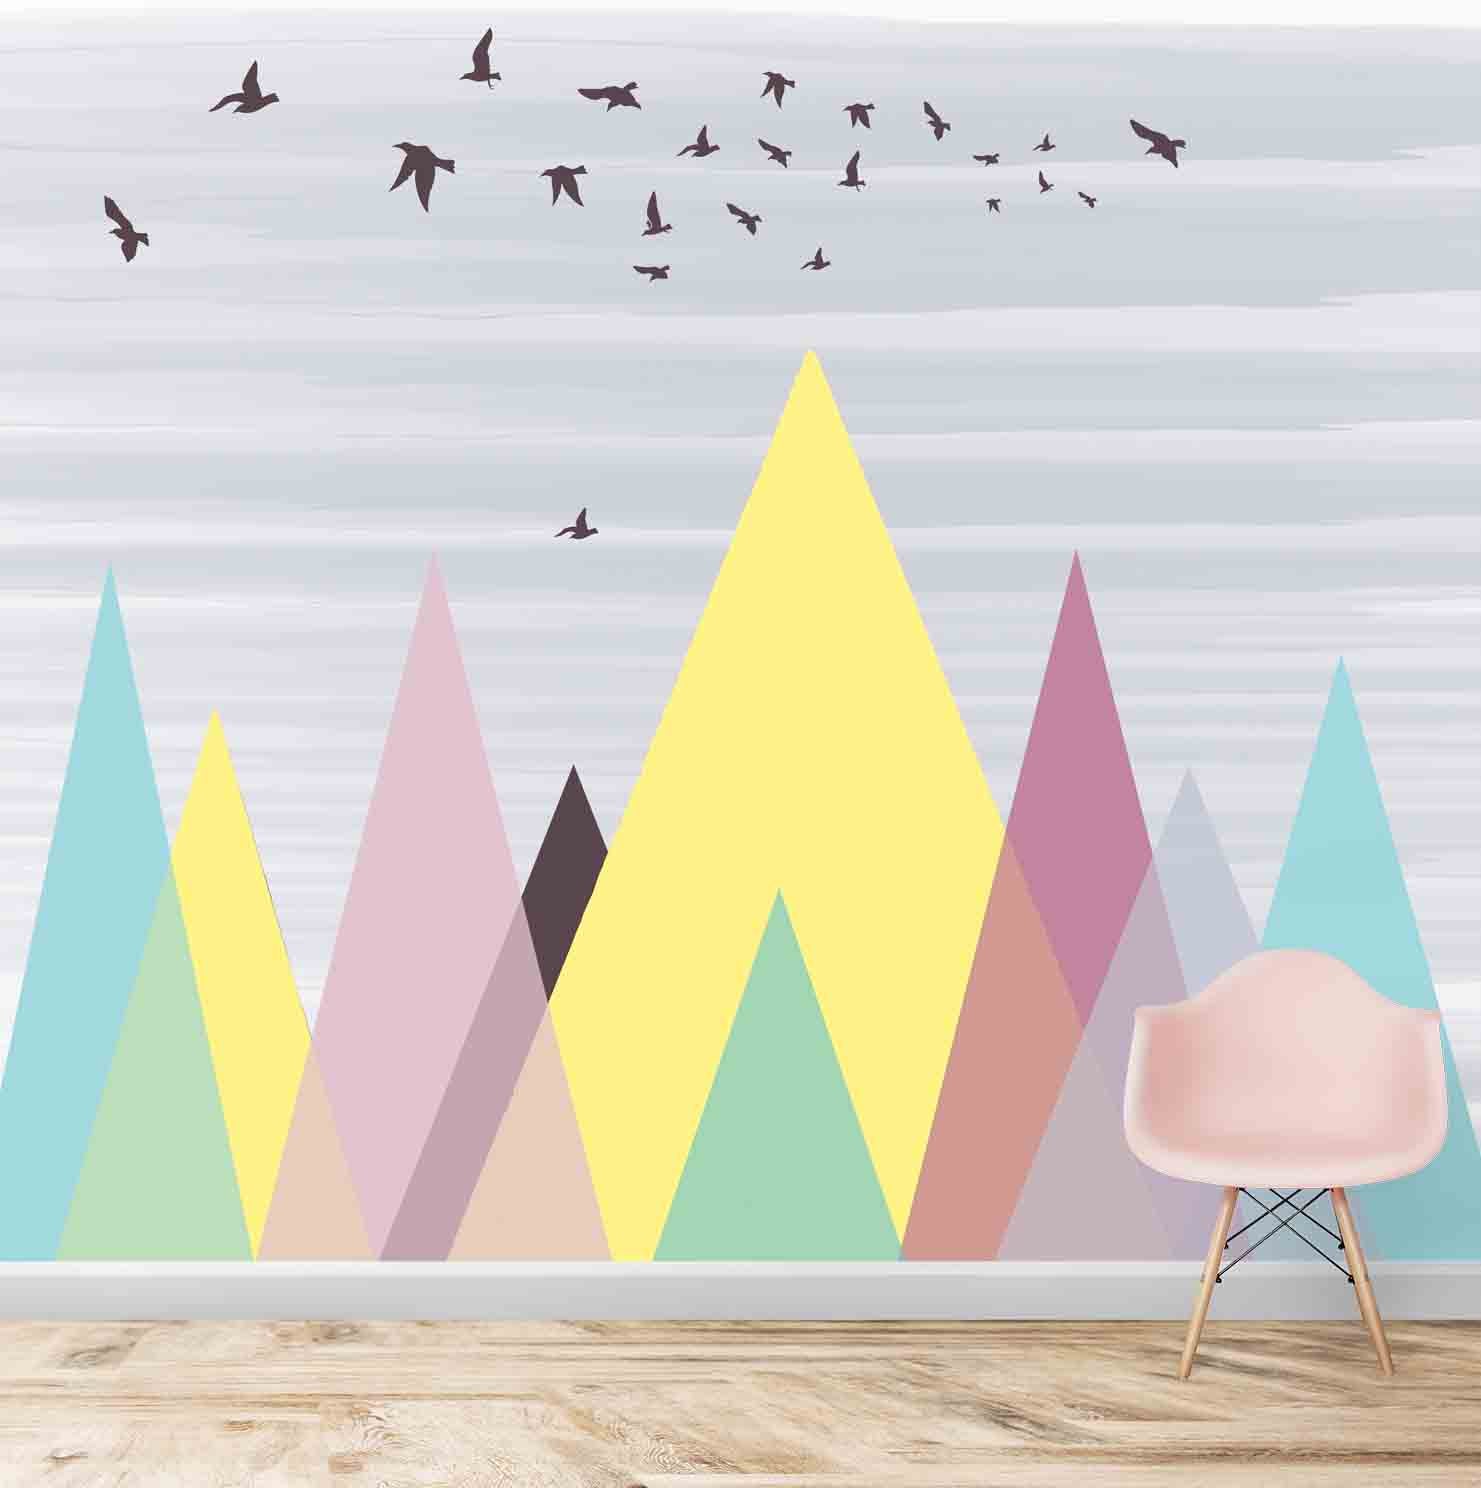 Water Painted Colourful Mountains, Scenery Theme For Kids Room